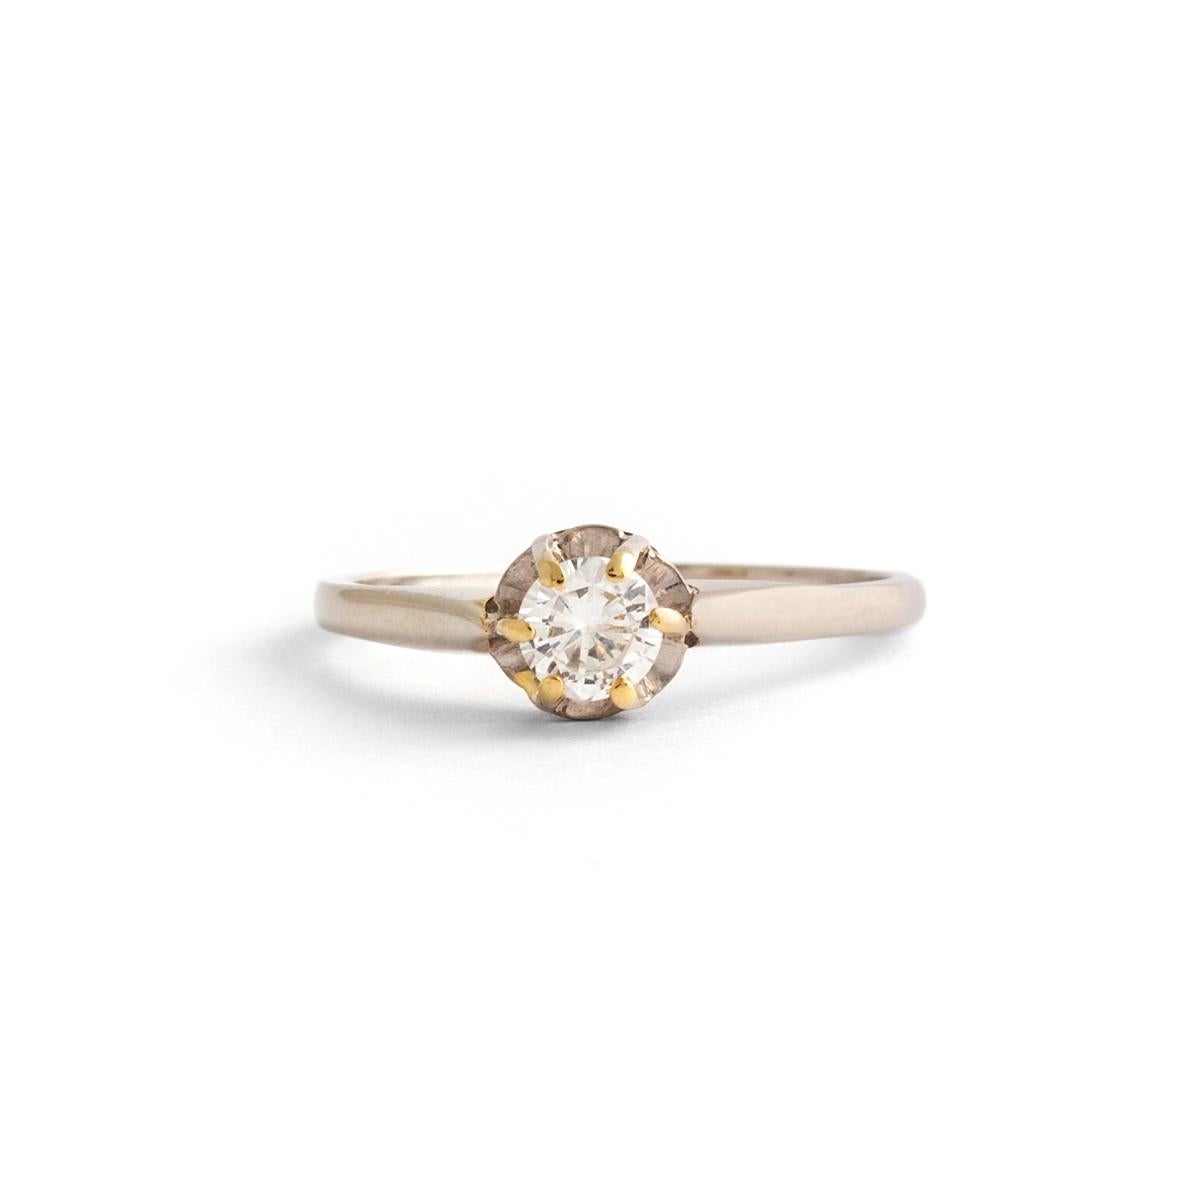 Solitaire Diamond on white gold Ring.
Modern cut. Estimated to be H-I color and Vs clarity.